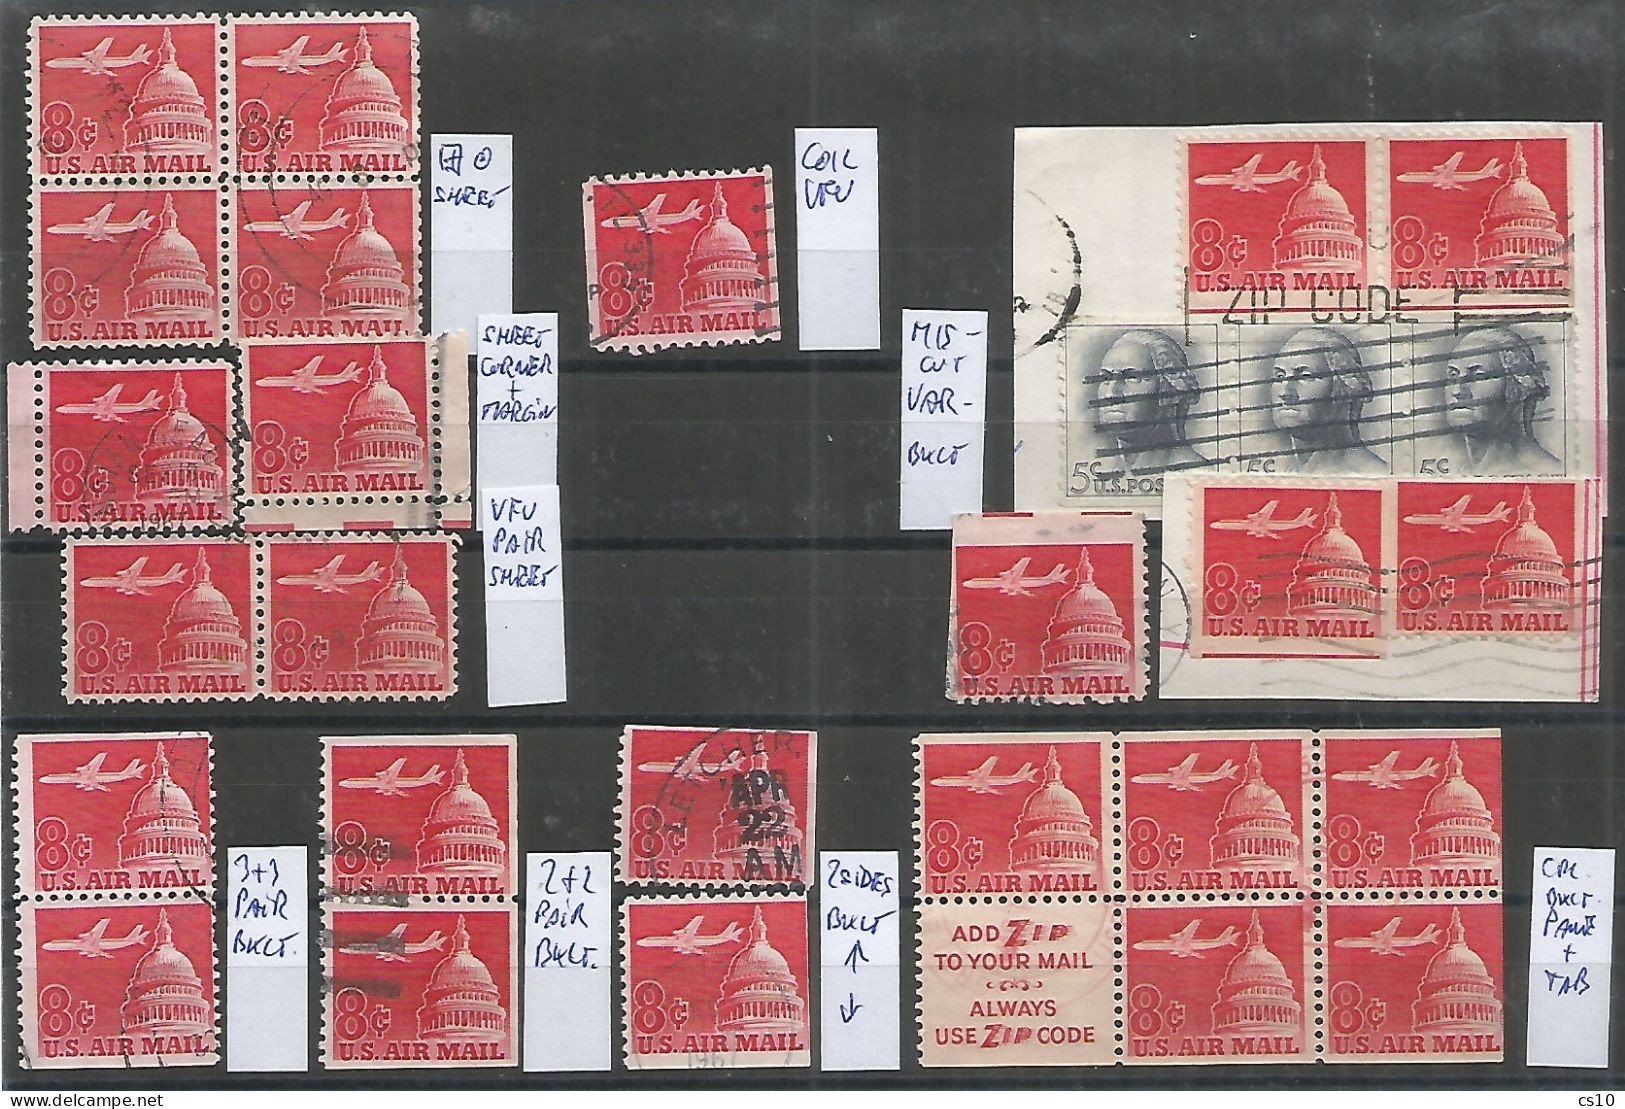 USA Airmail 1962 Jet & Capitol Dome SC# C64+65 Cpl Issue BL4 Sheet Coil Booklet Pane Pairs & Singles + Small Variety - Rollen